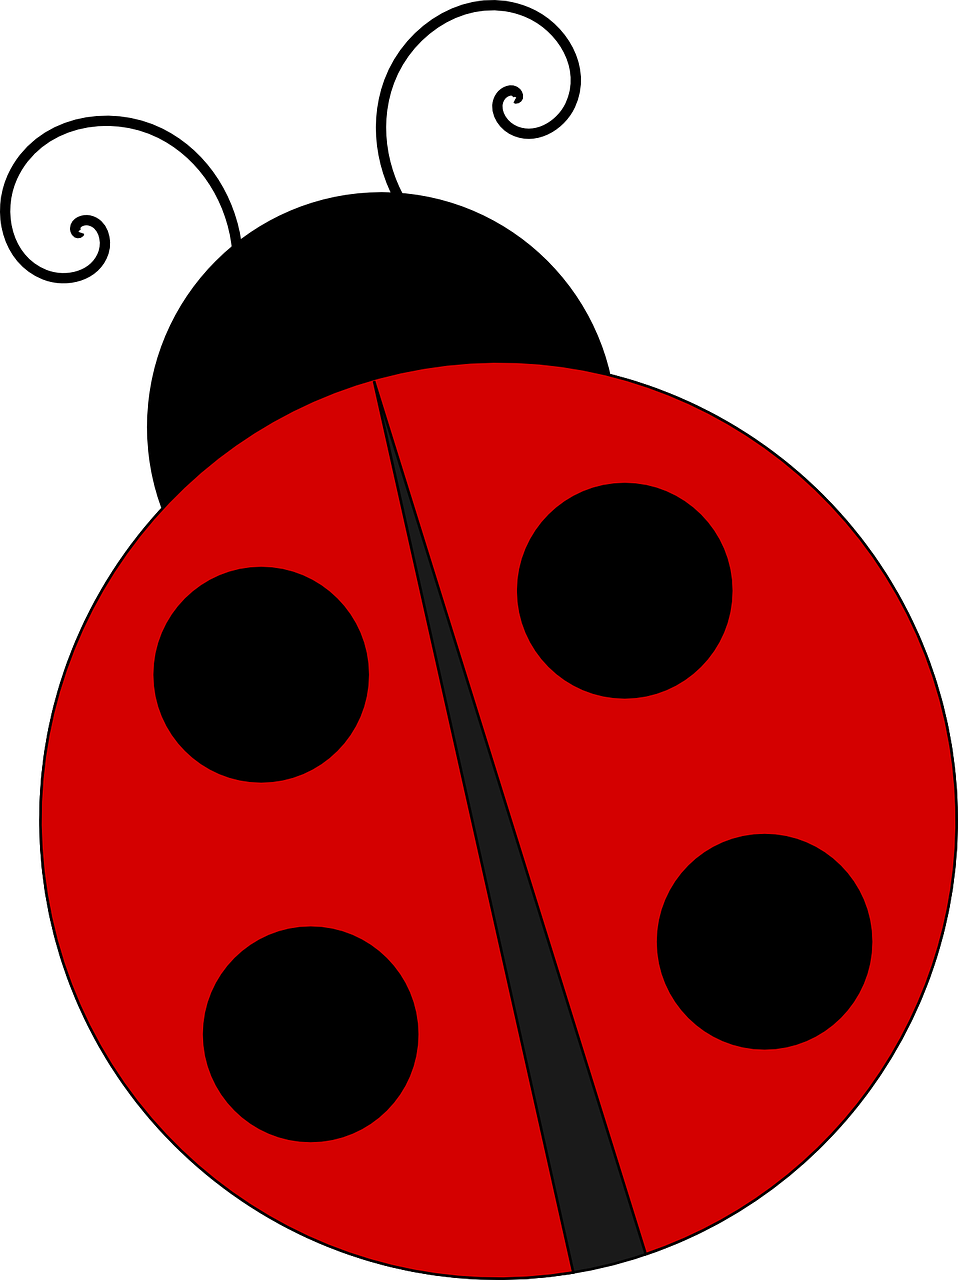 Vector Ladybug Insect PNG Transparent Image